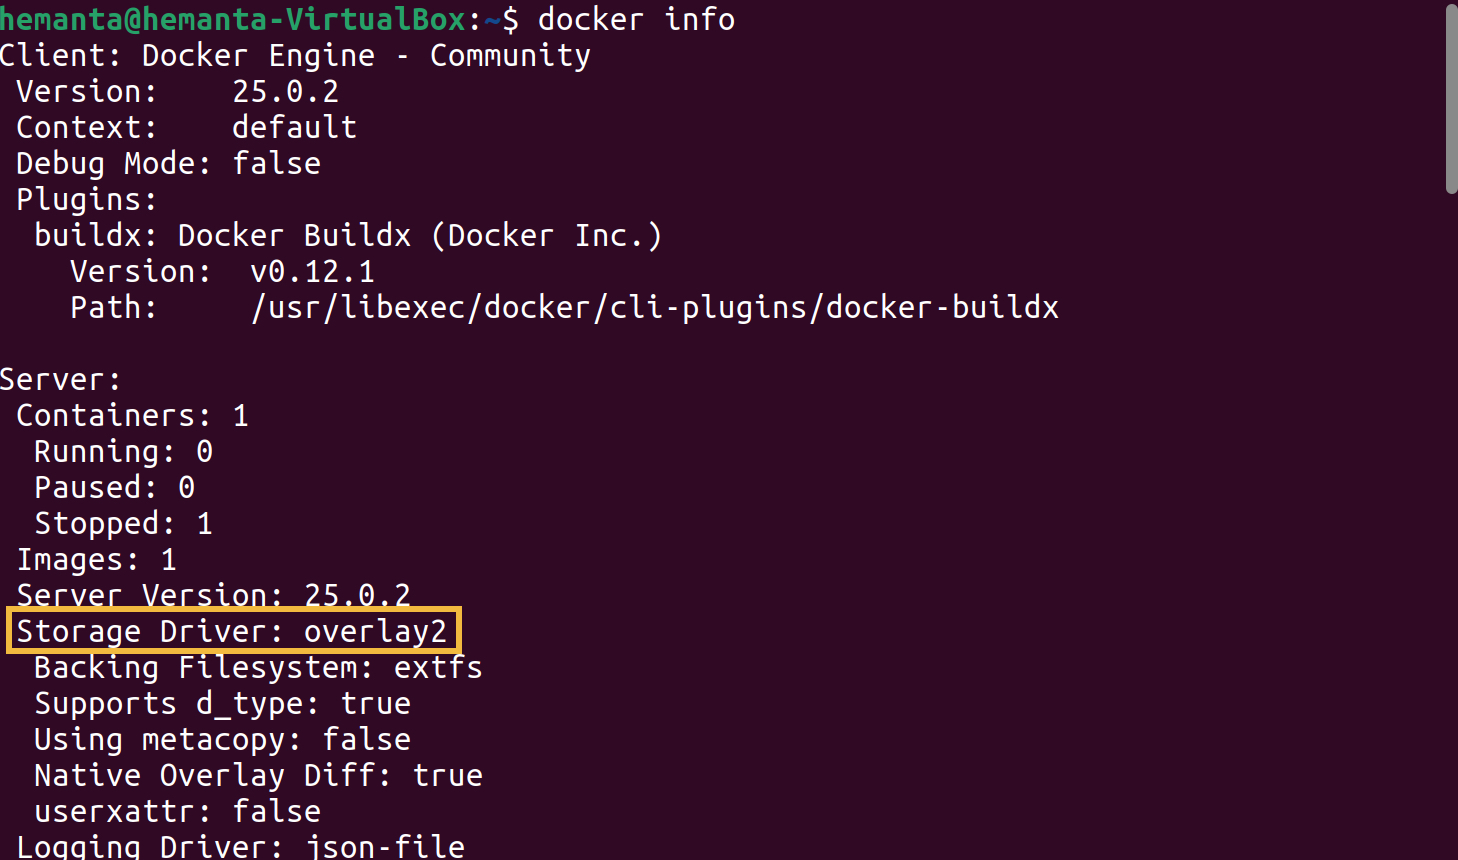 Where Docker Images are Stored